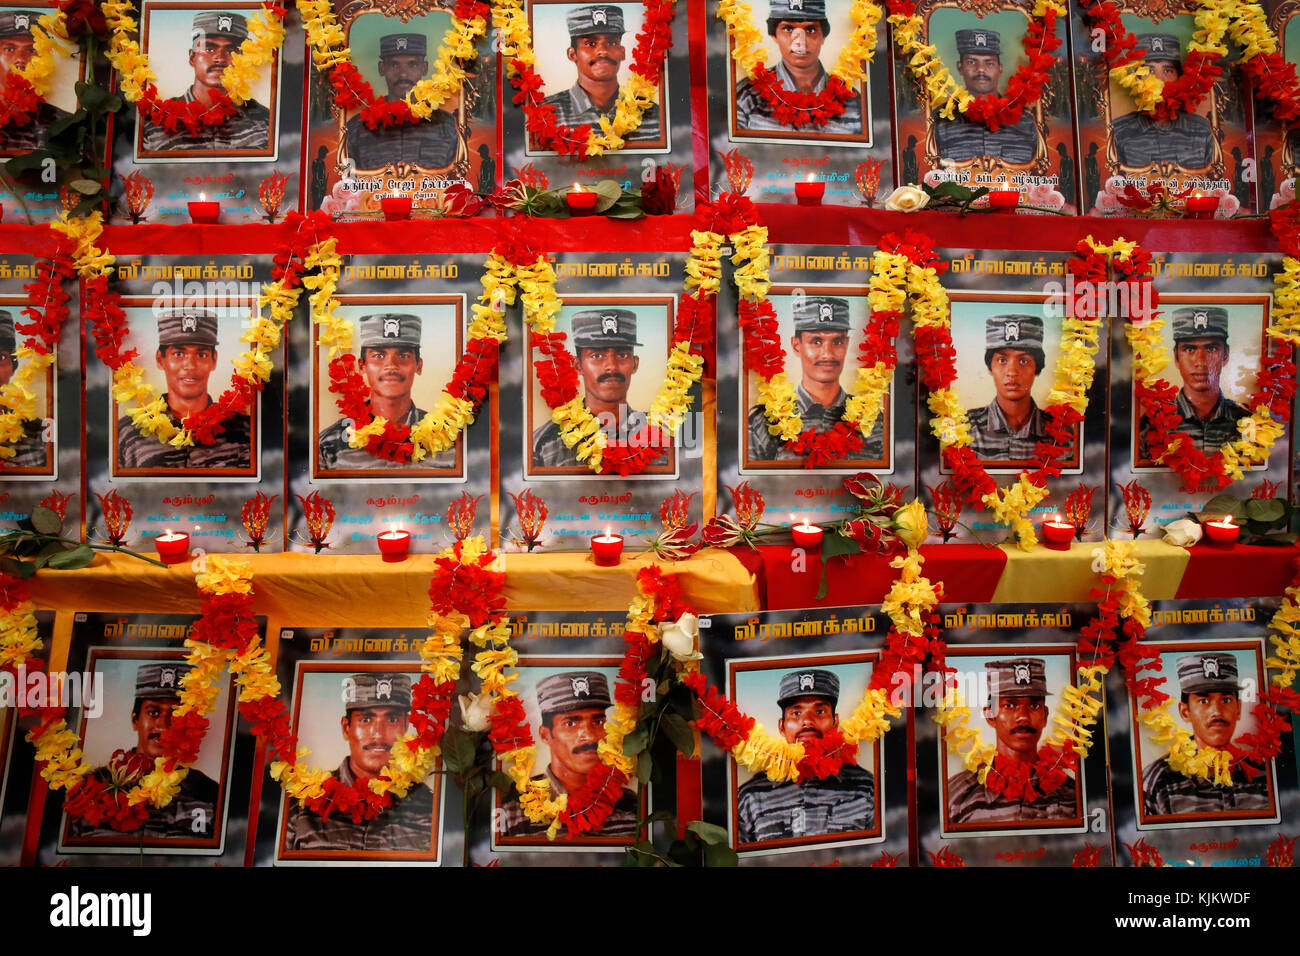 Tamil Eelam meeting in Sarcelles, France. Homage to the fallen soldiers of Tamil Eelam. Stock Photo